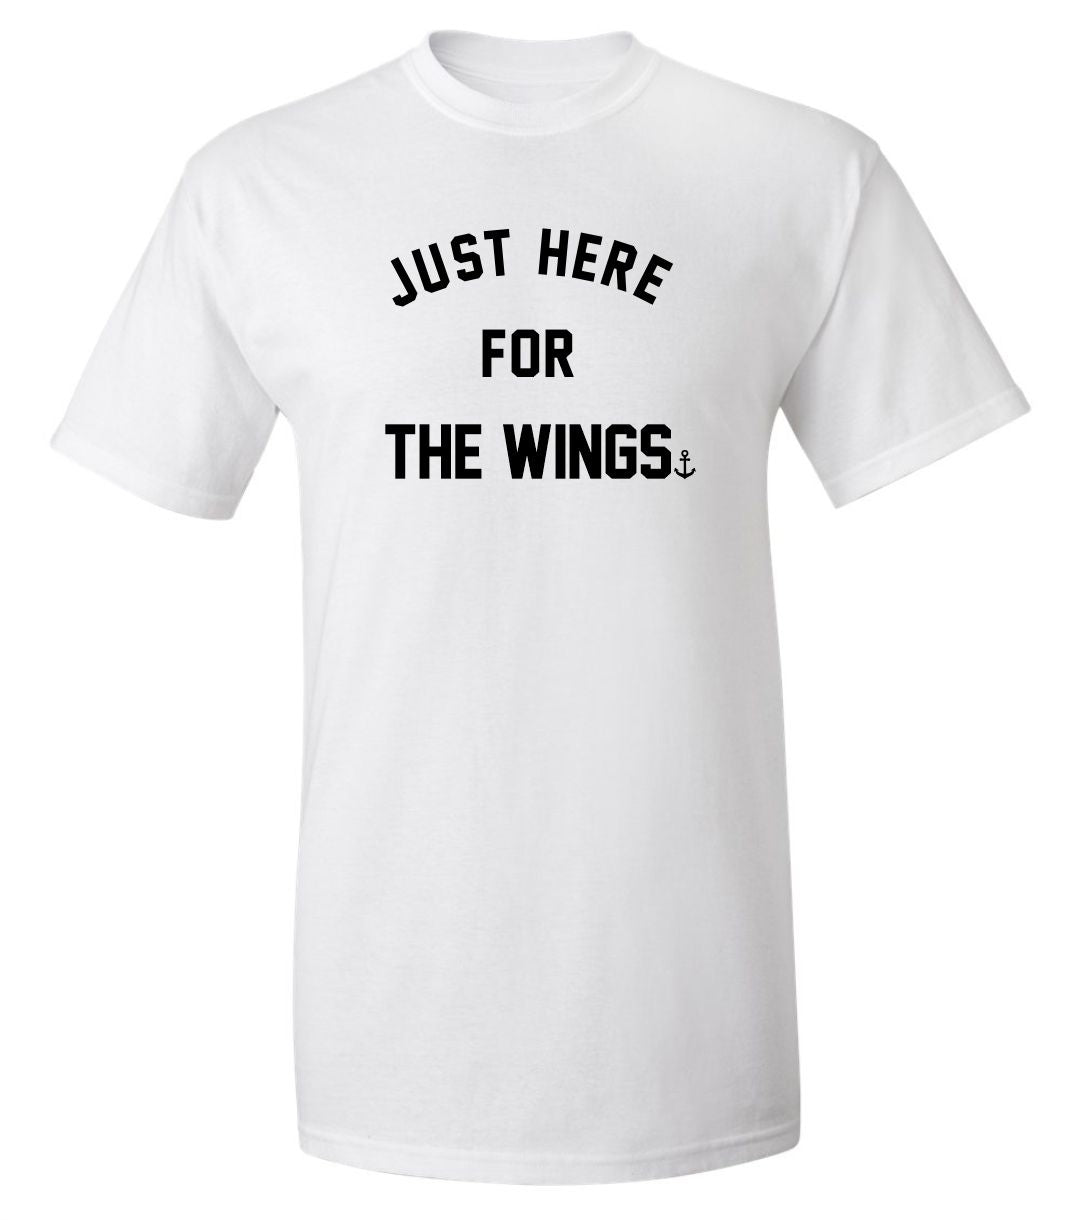 "Just Here For The Wings" T-Shirt